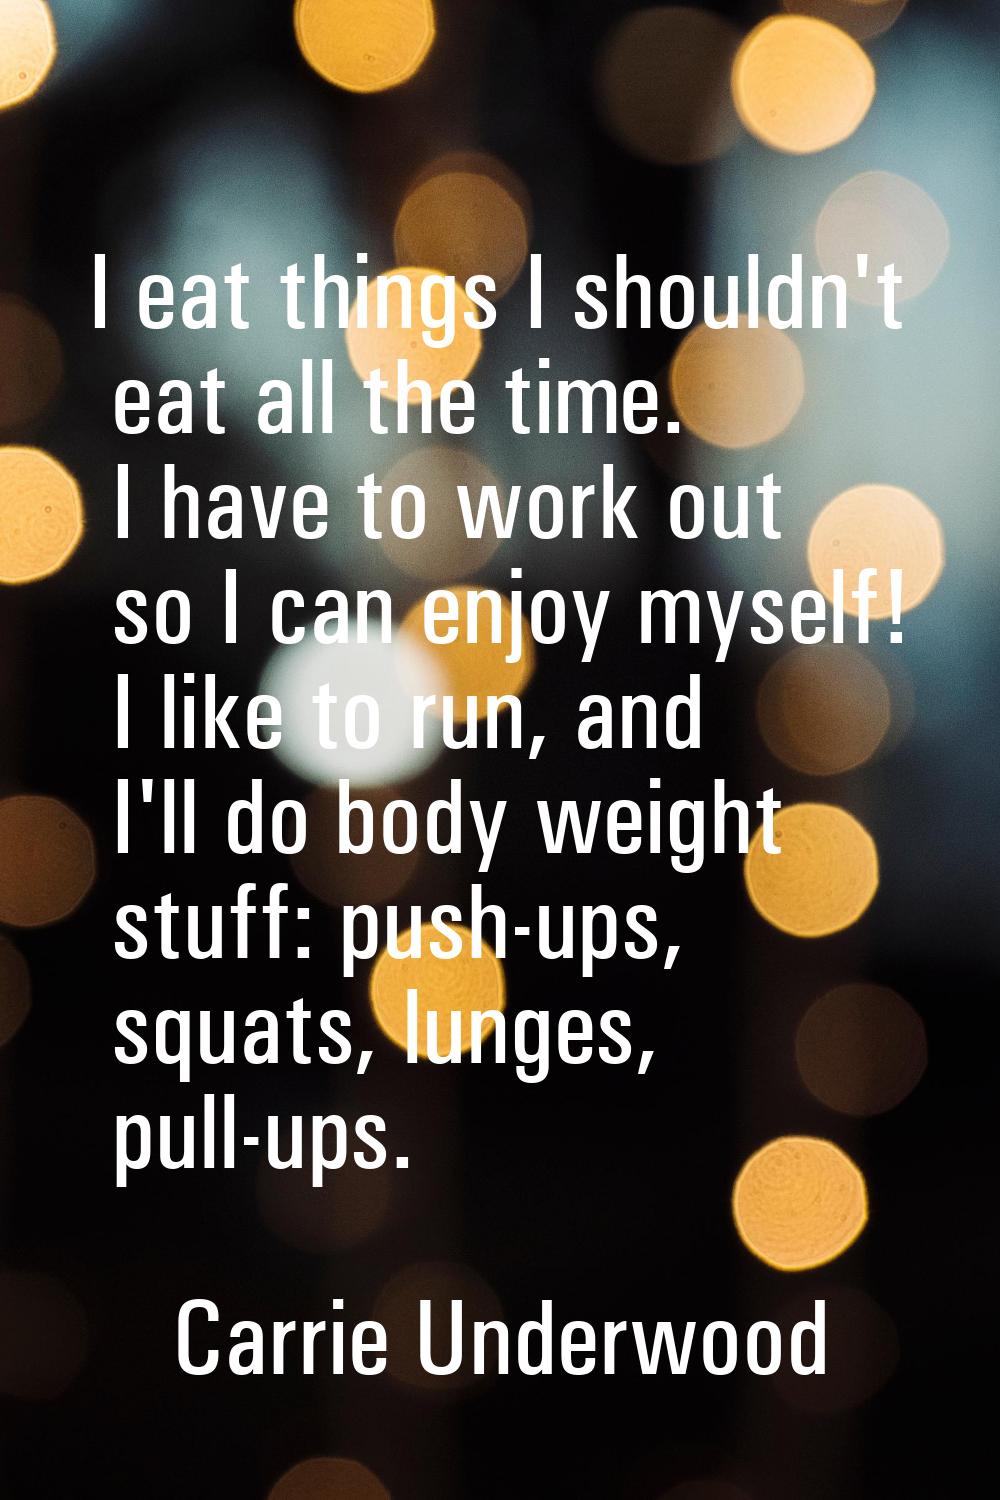 I eat things I shouldn't eat all the time. I have to work out so I can enjoy myself! I like to run,